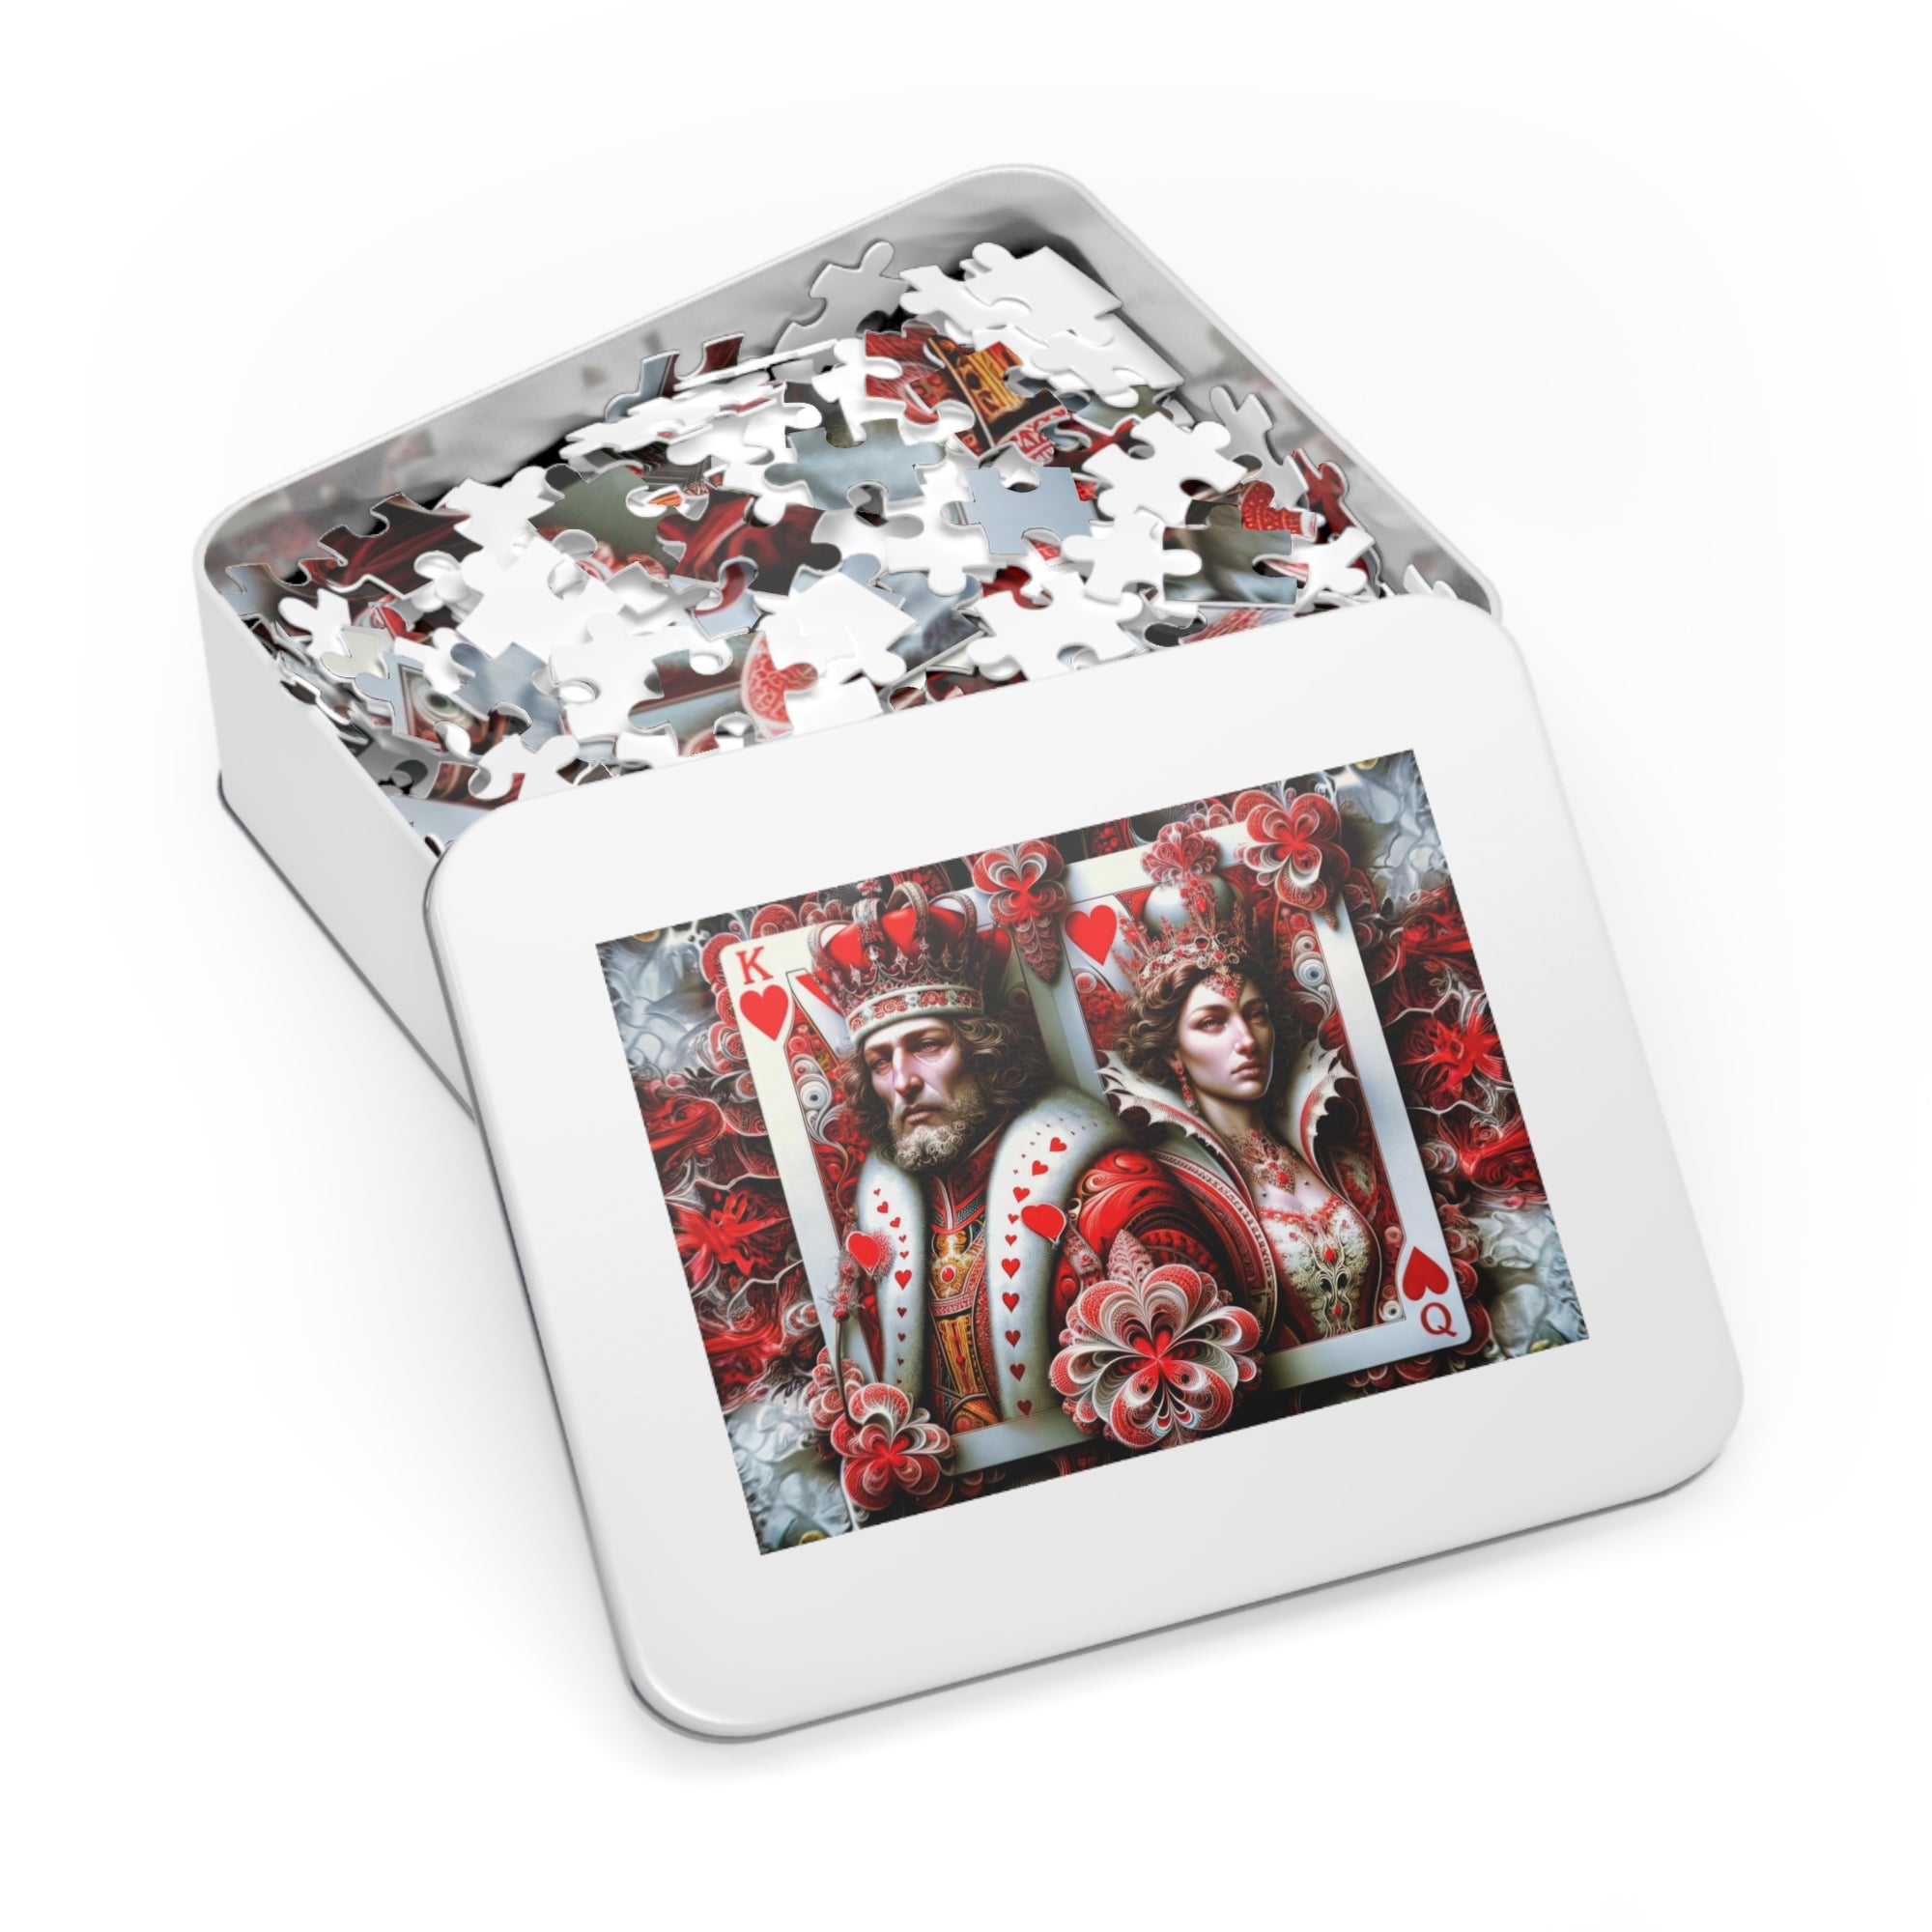 The King and Queen of Hearts' Embrace Puzzle